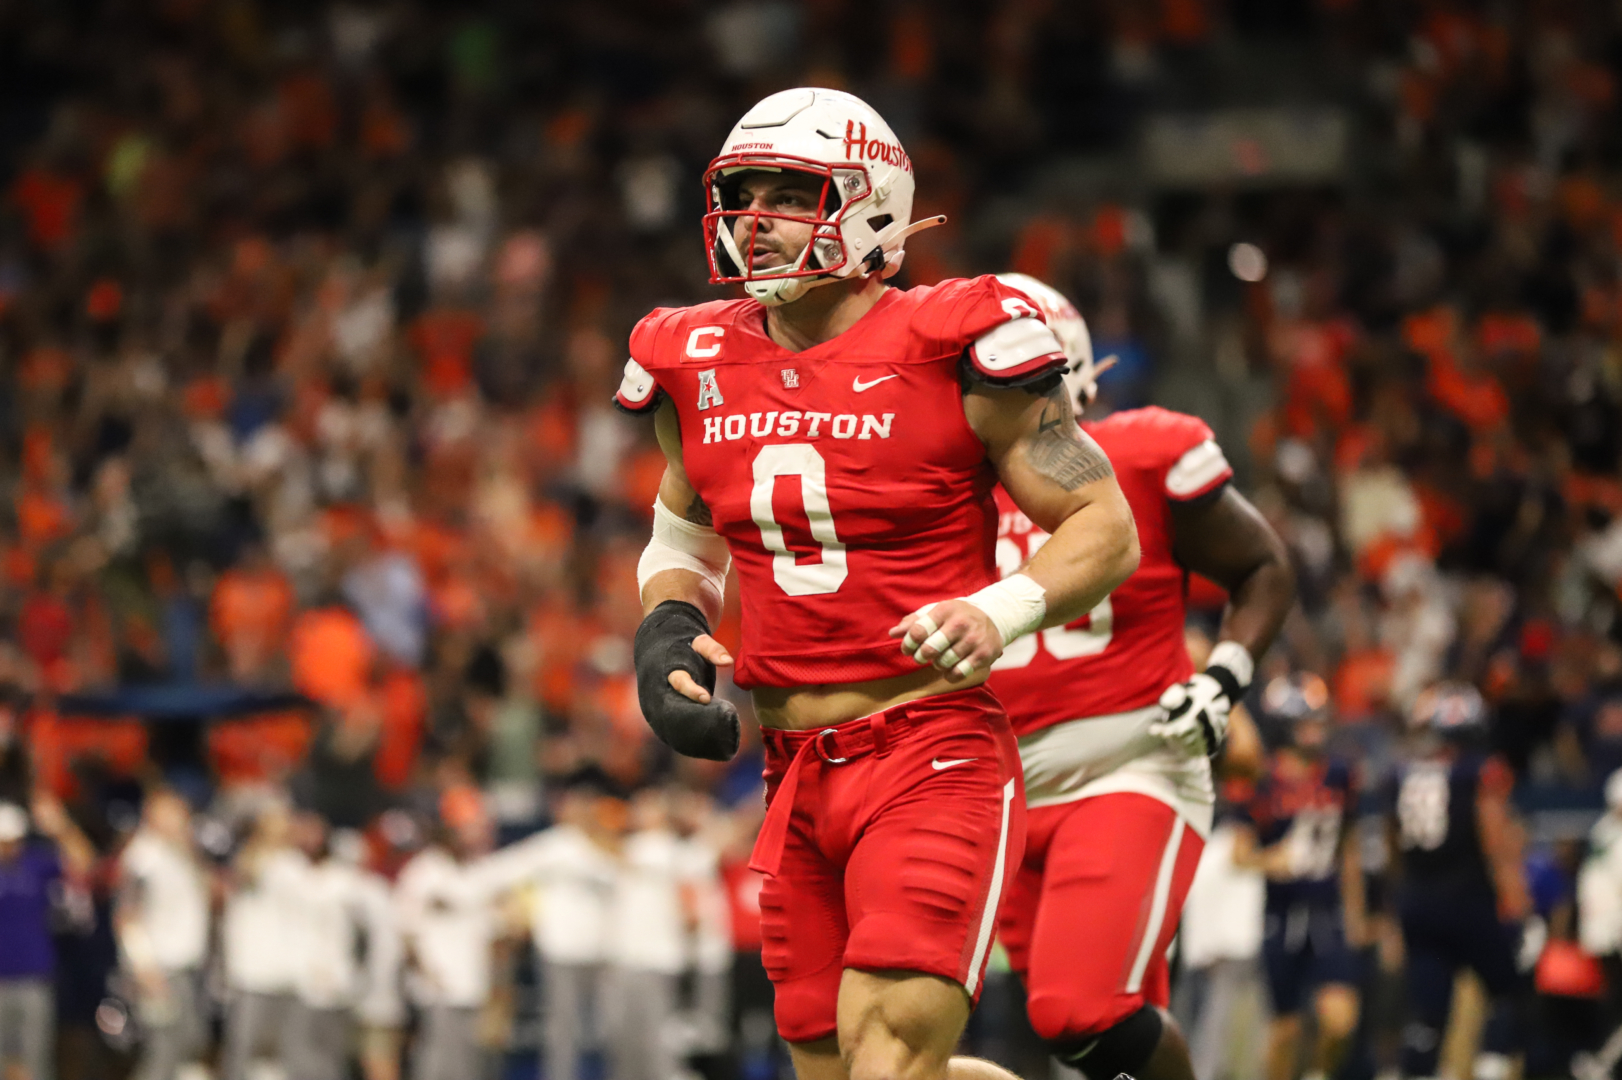 The UH defense suffered a major blow as head coach Dana Holgorsen announced that senior defensive end Derek Parish would miss the remainder of the 2022 season with a torn bicep he suffered in the first half against Rice. | Sean Thomas/The Cougar